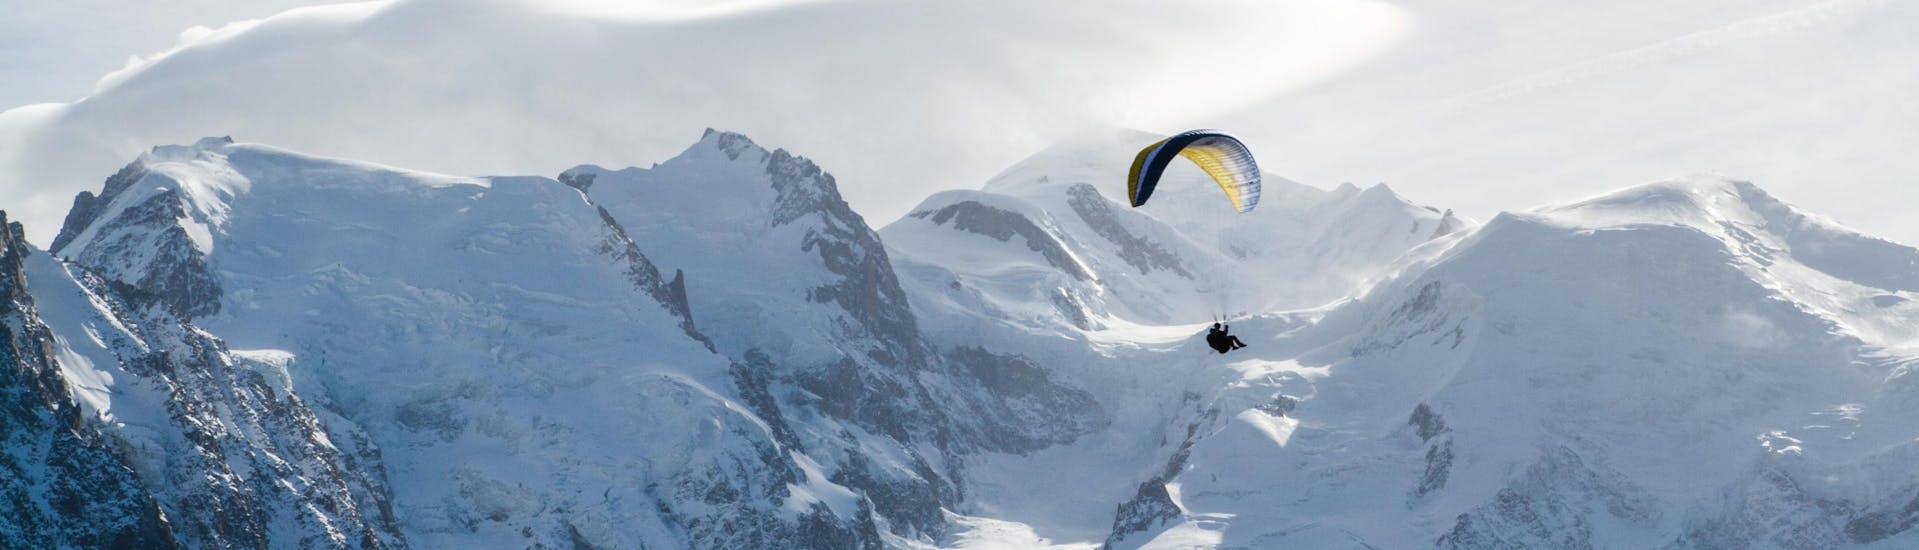 A person is doing a paragliding flight in the Chamonix valley from Plan de l'Aiguille with snowy mountains in the background.